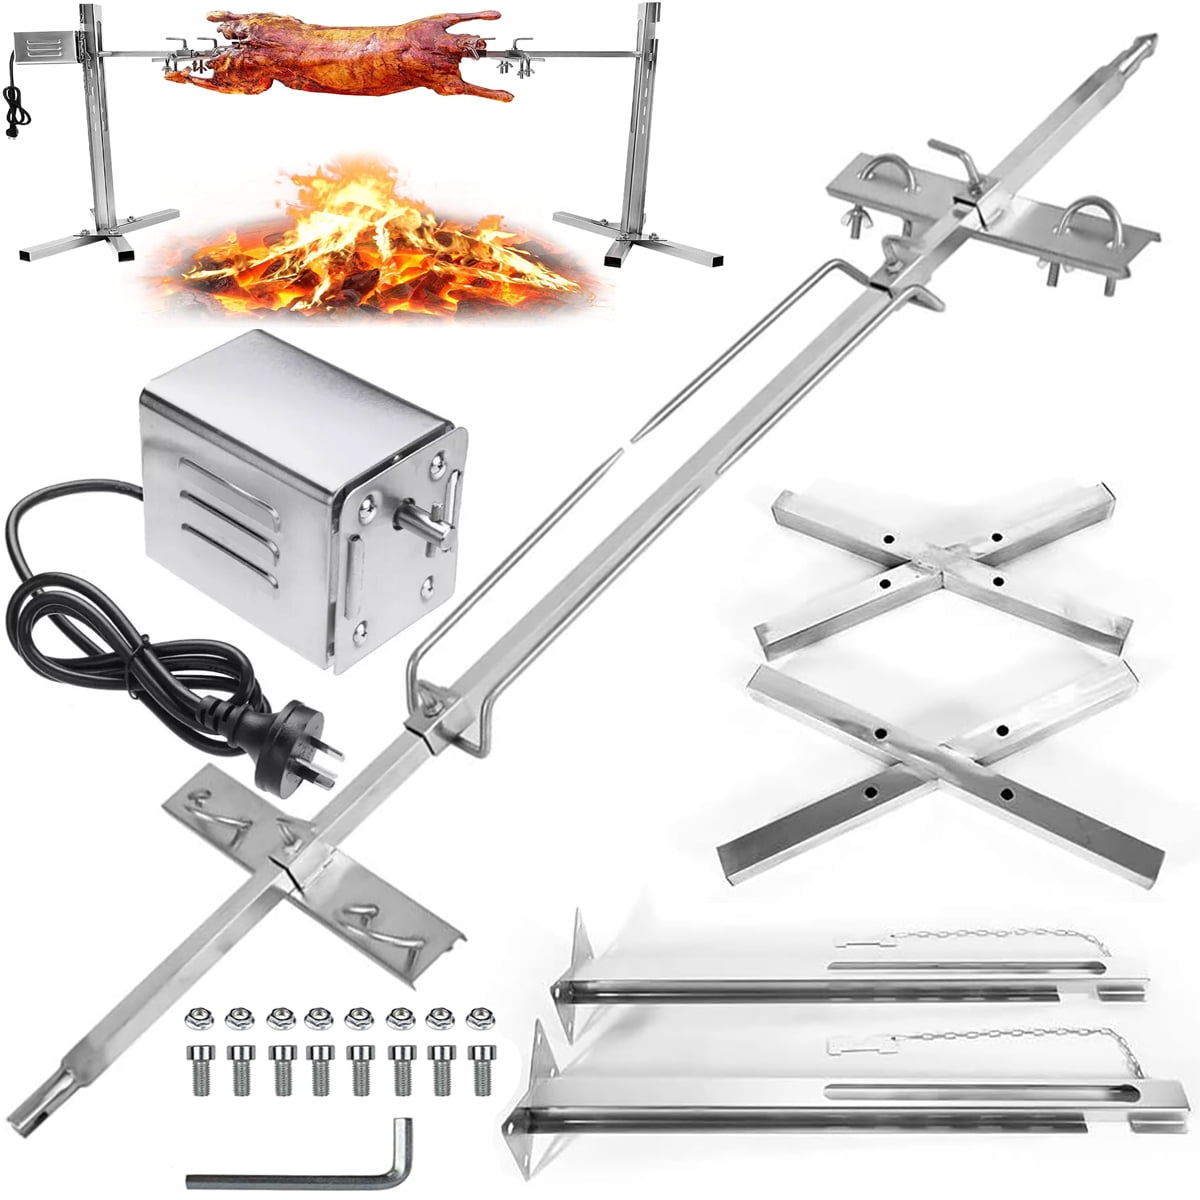 15W Motor Large Barbecue Grill Rotisserie Spit Roaster Rod Charcoal Camping 